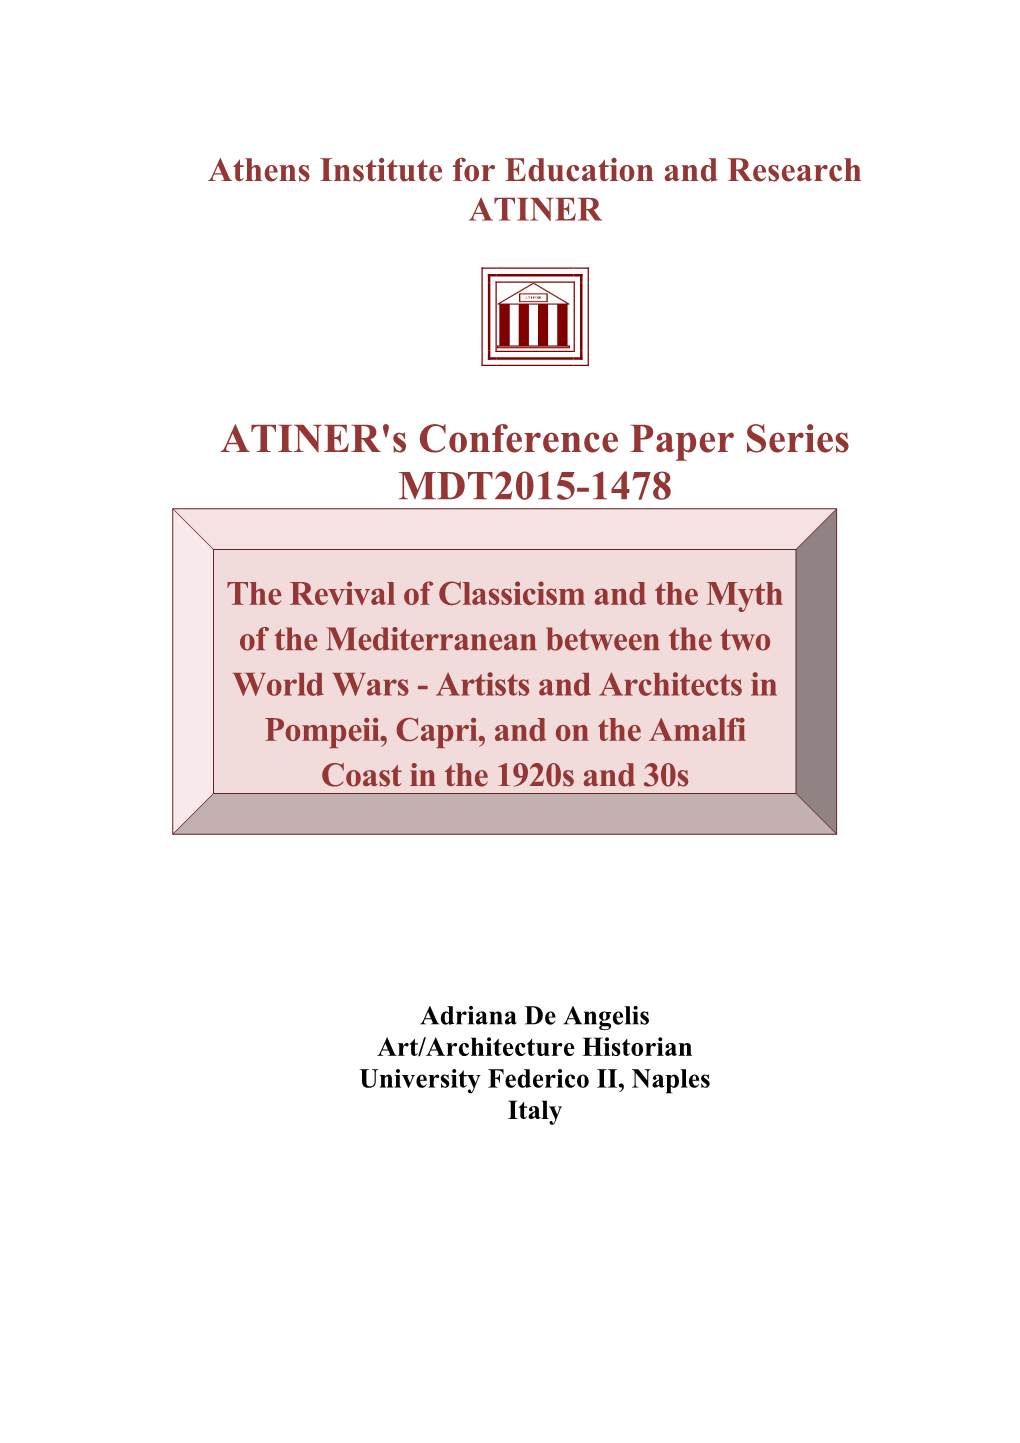 ATINER's Conference Paper Series MDT2015-1478